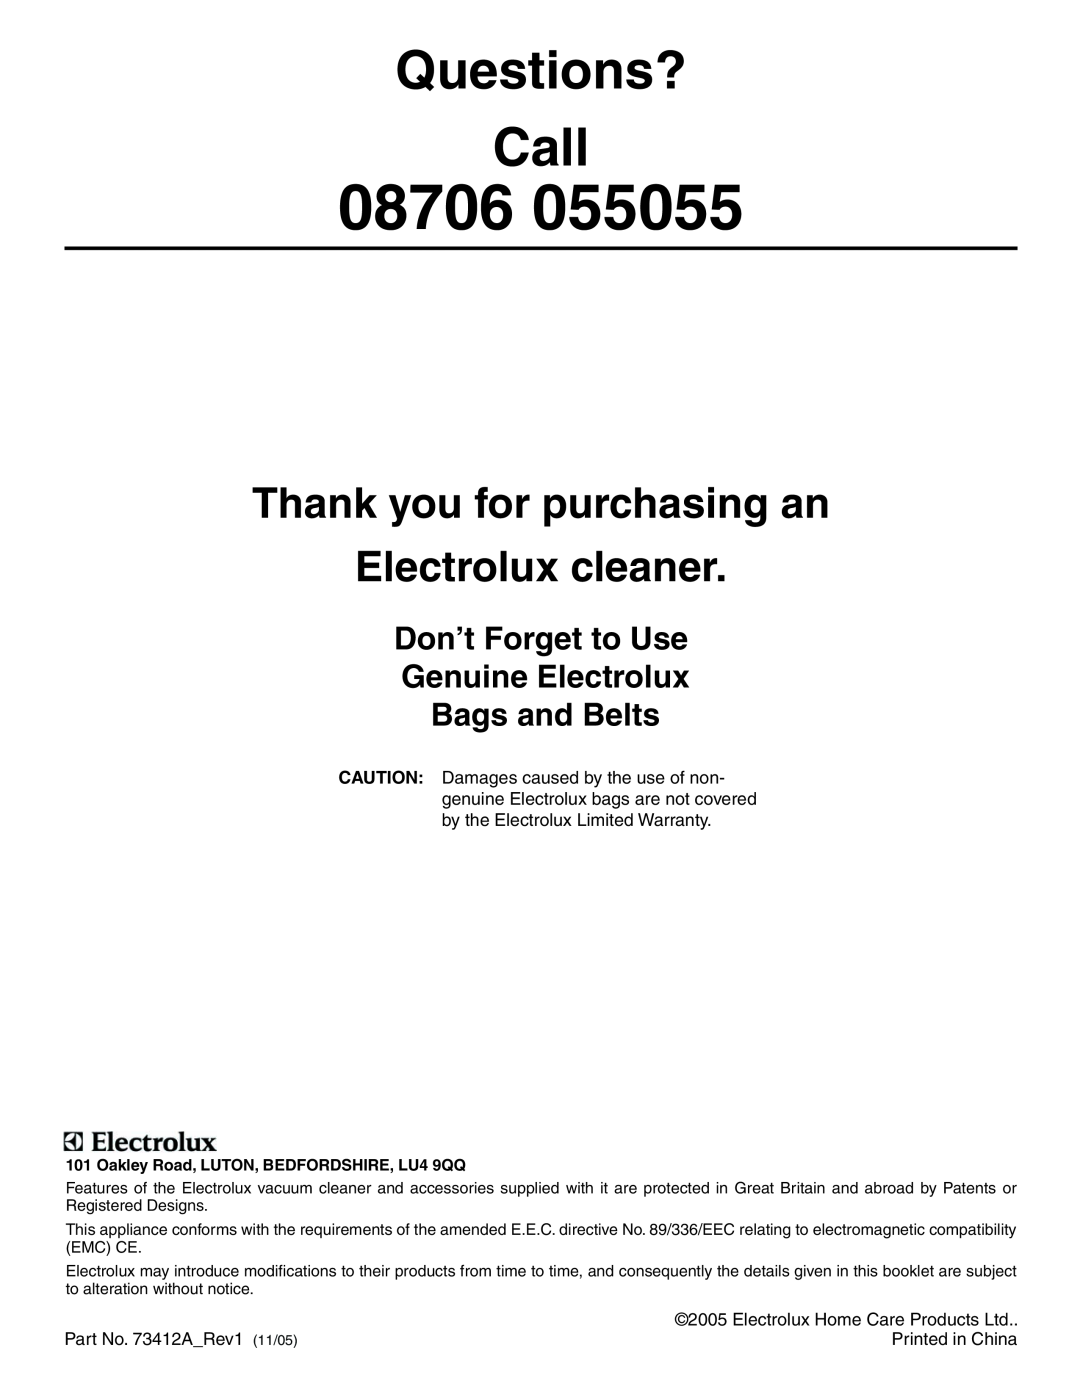 Electrolux Z2900 Series manual Thank you for purchasing an Electrolux cleaner, 08706, Questions? Call 